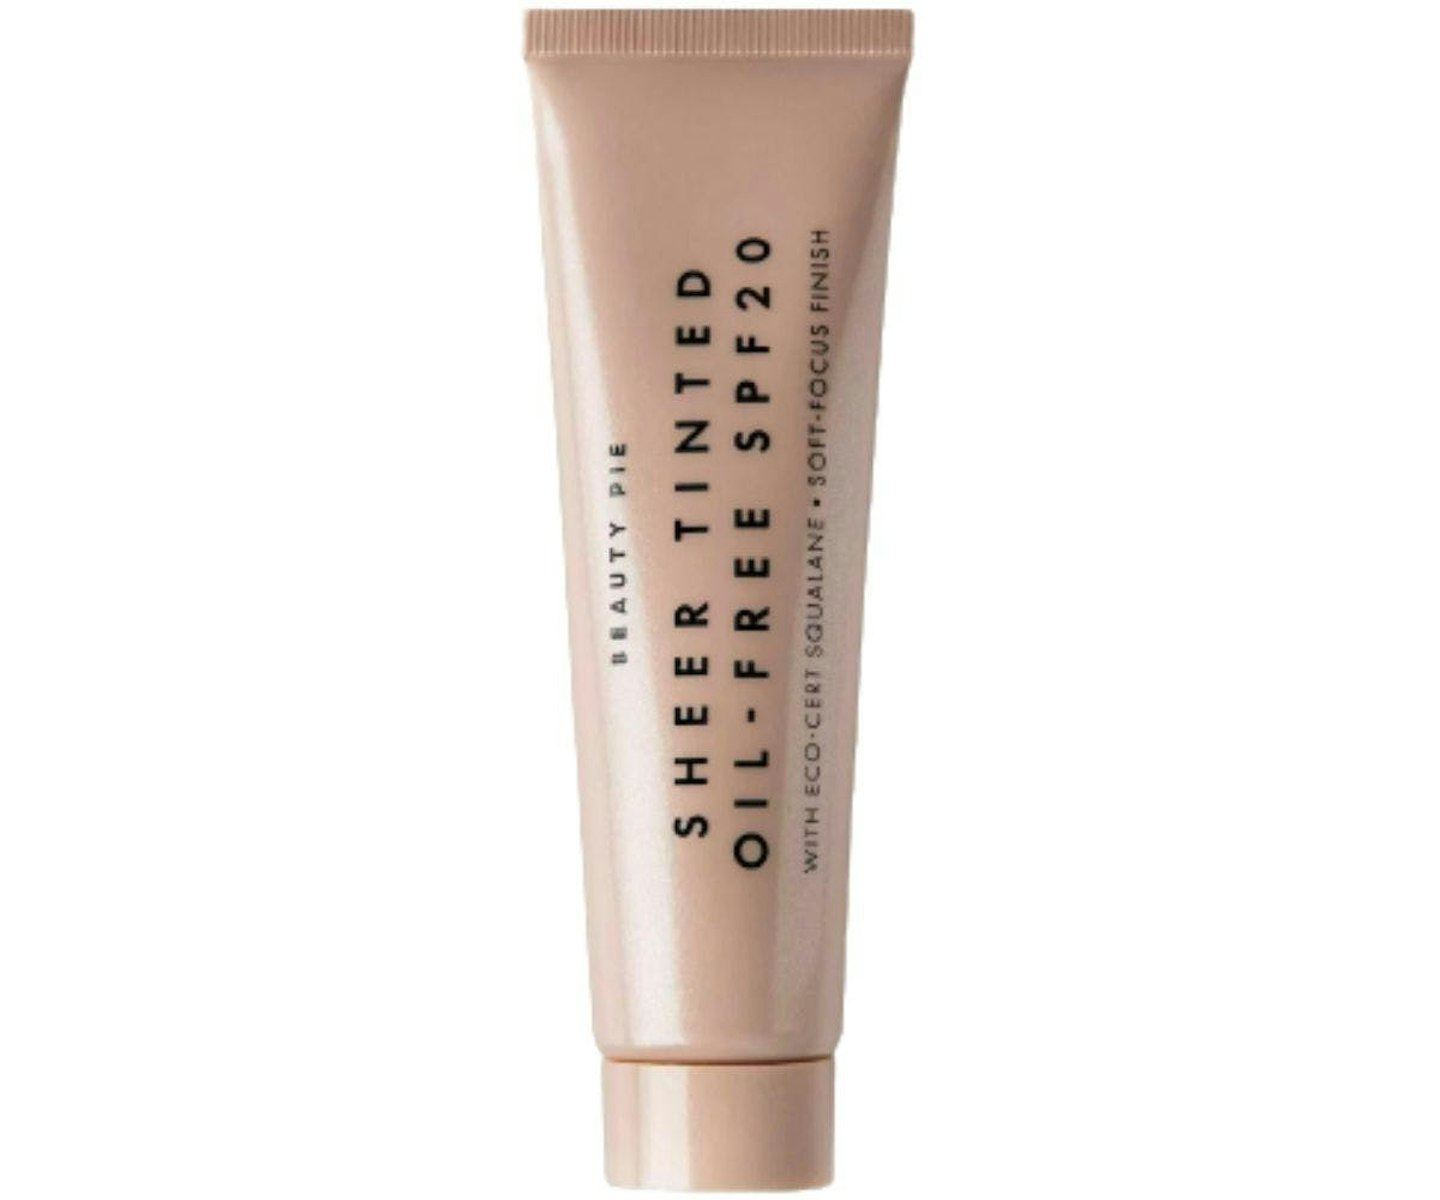 Beauty Pie Sheer Tinted Oil-Free SPF20